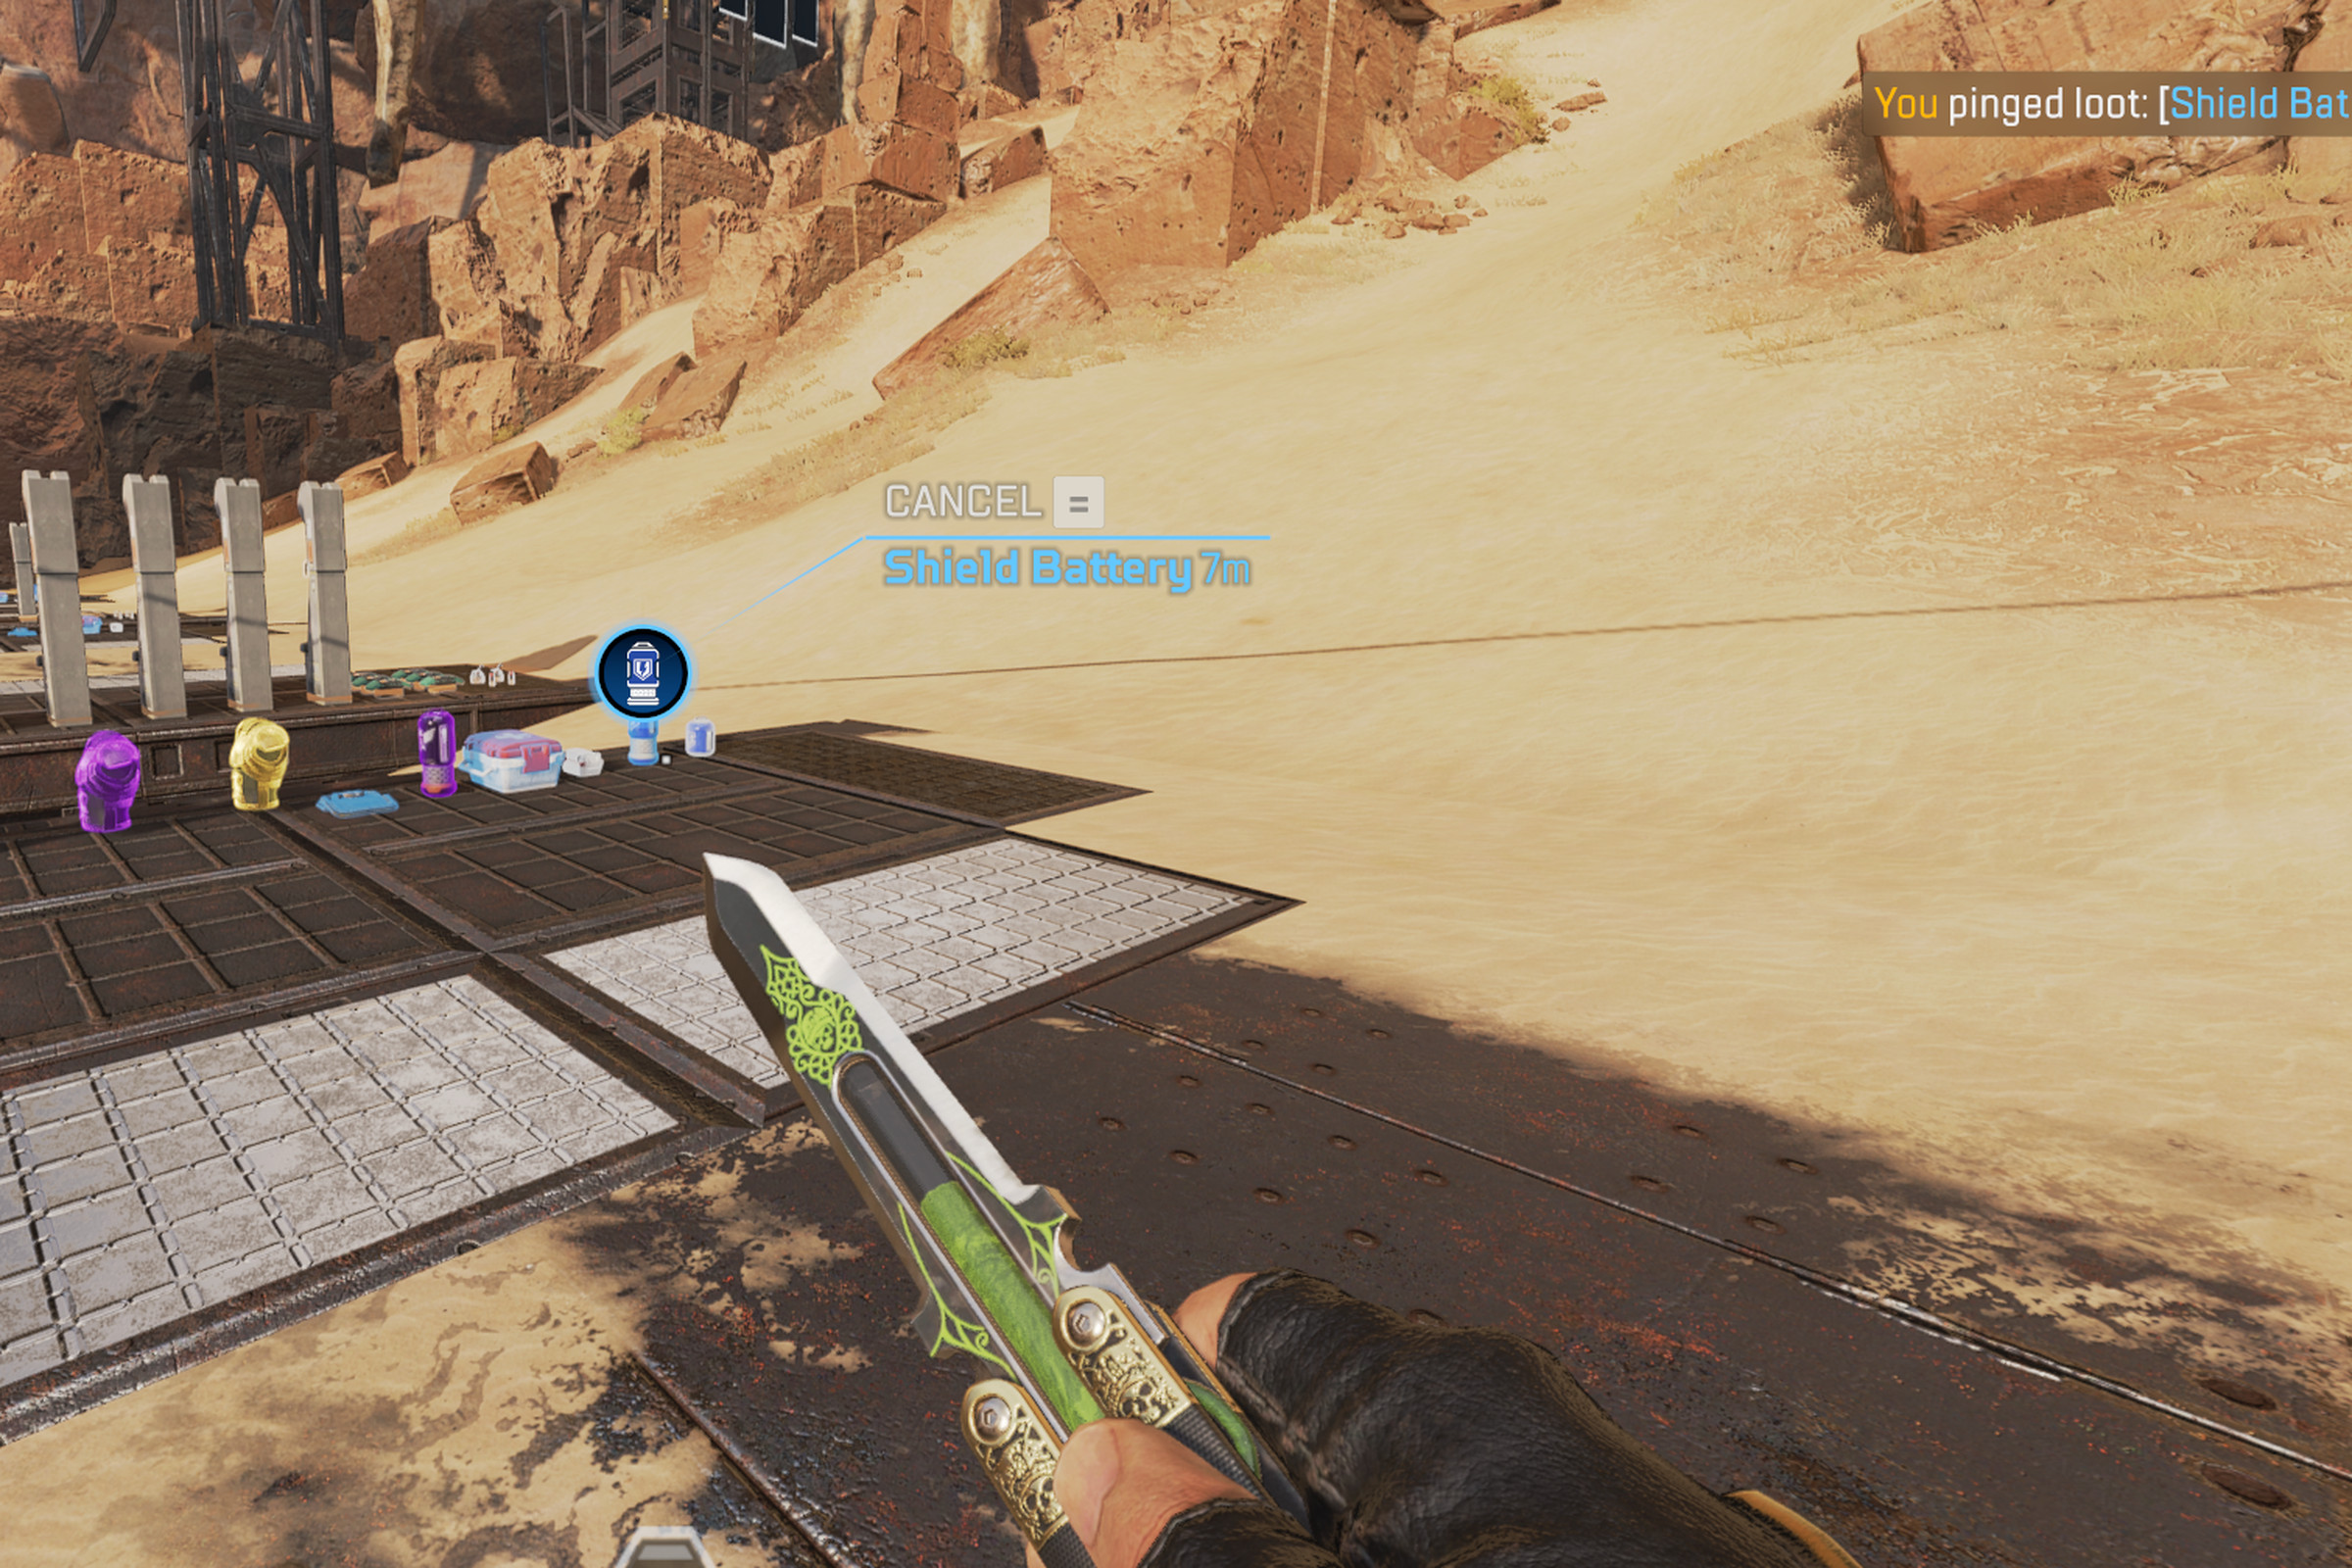 Screenshot of Apex Legends, showing a dessert landscape and a hand holding a knife, with text in the upper right corner that says “you pinged shield battery.”